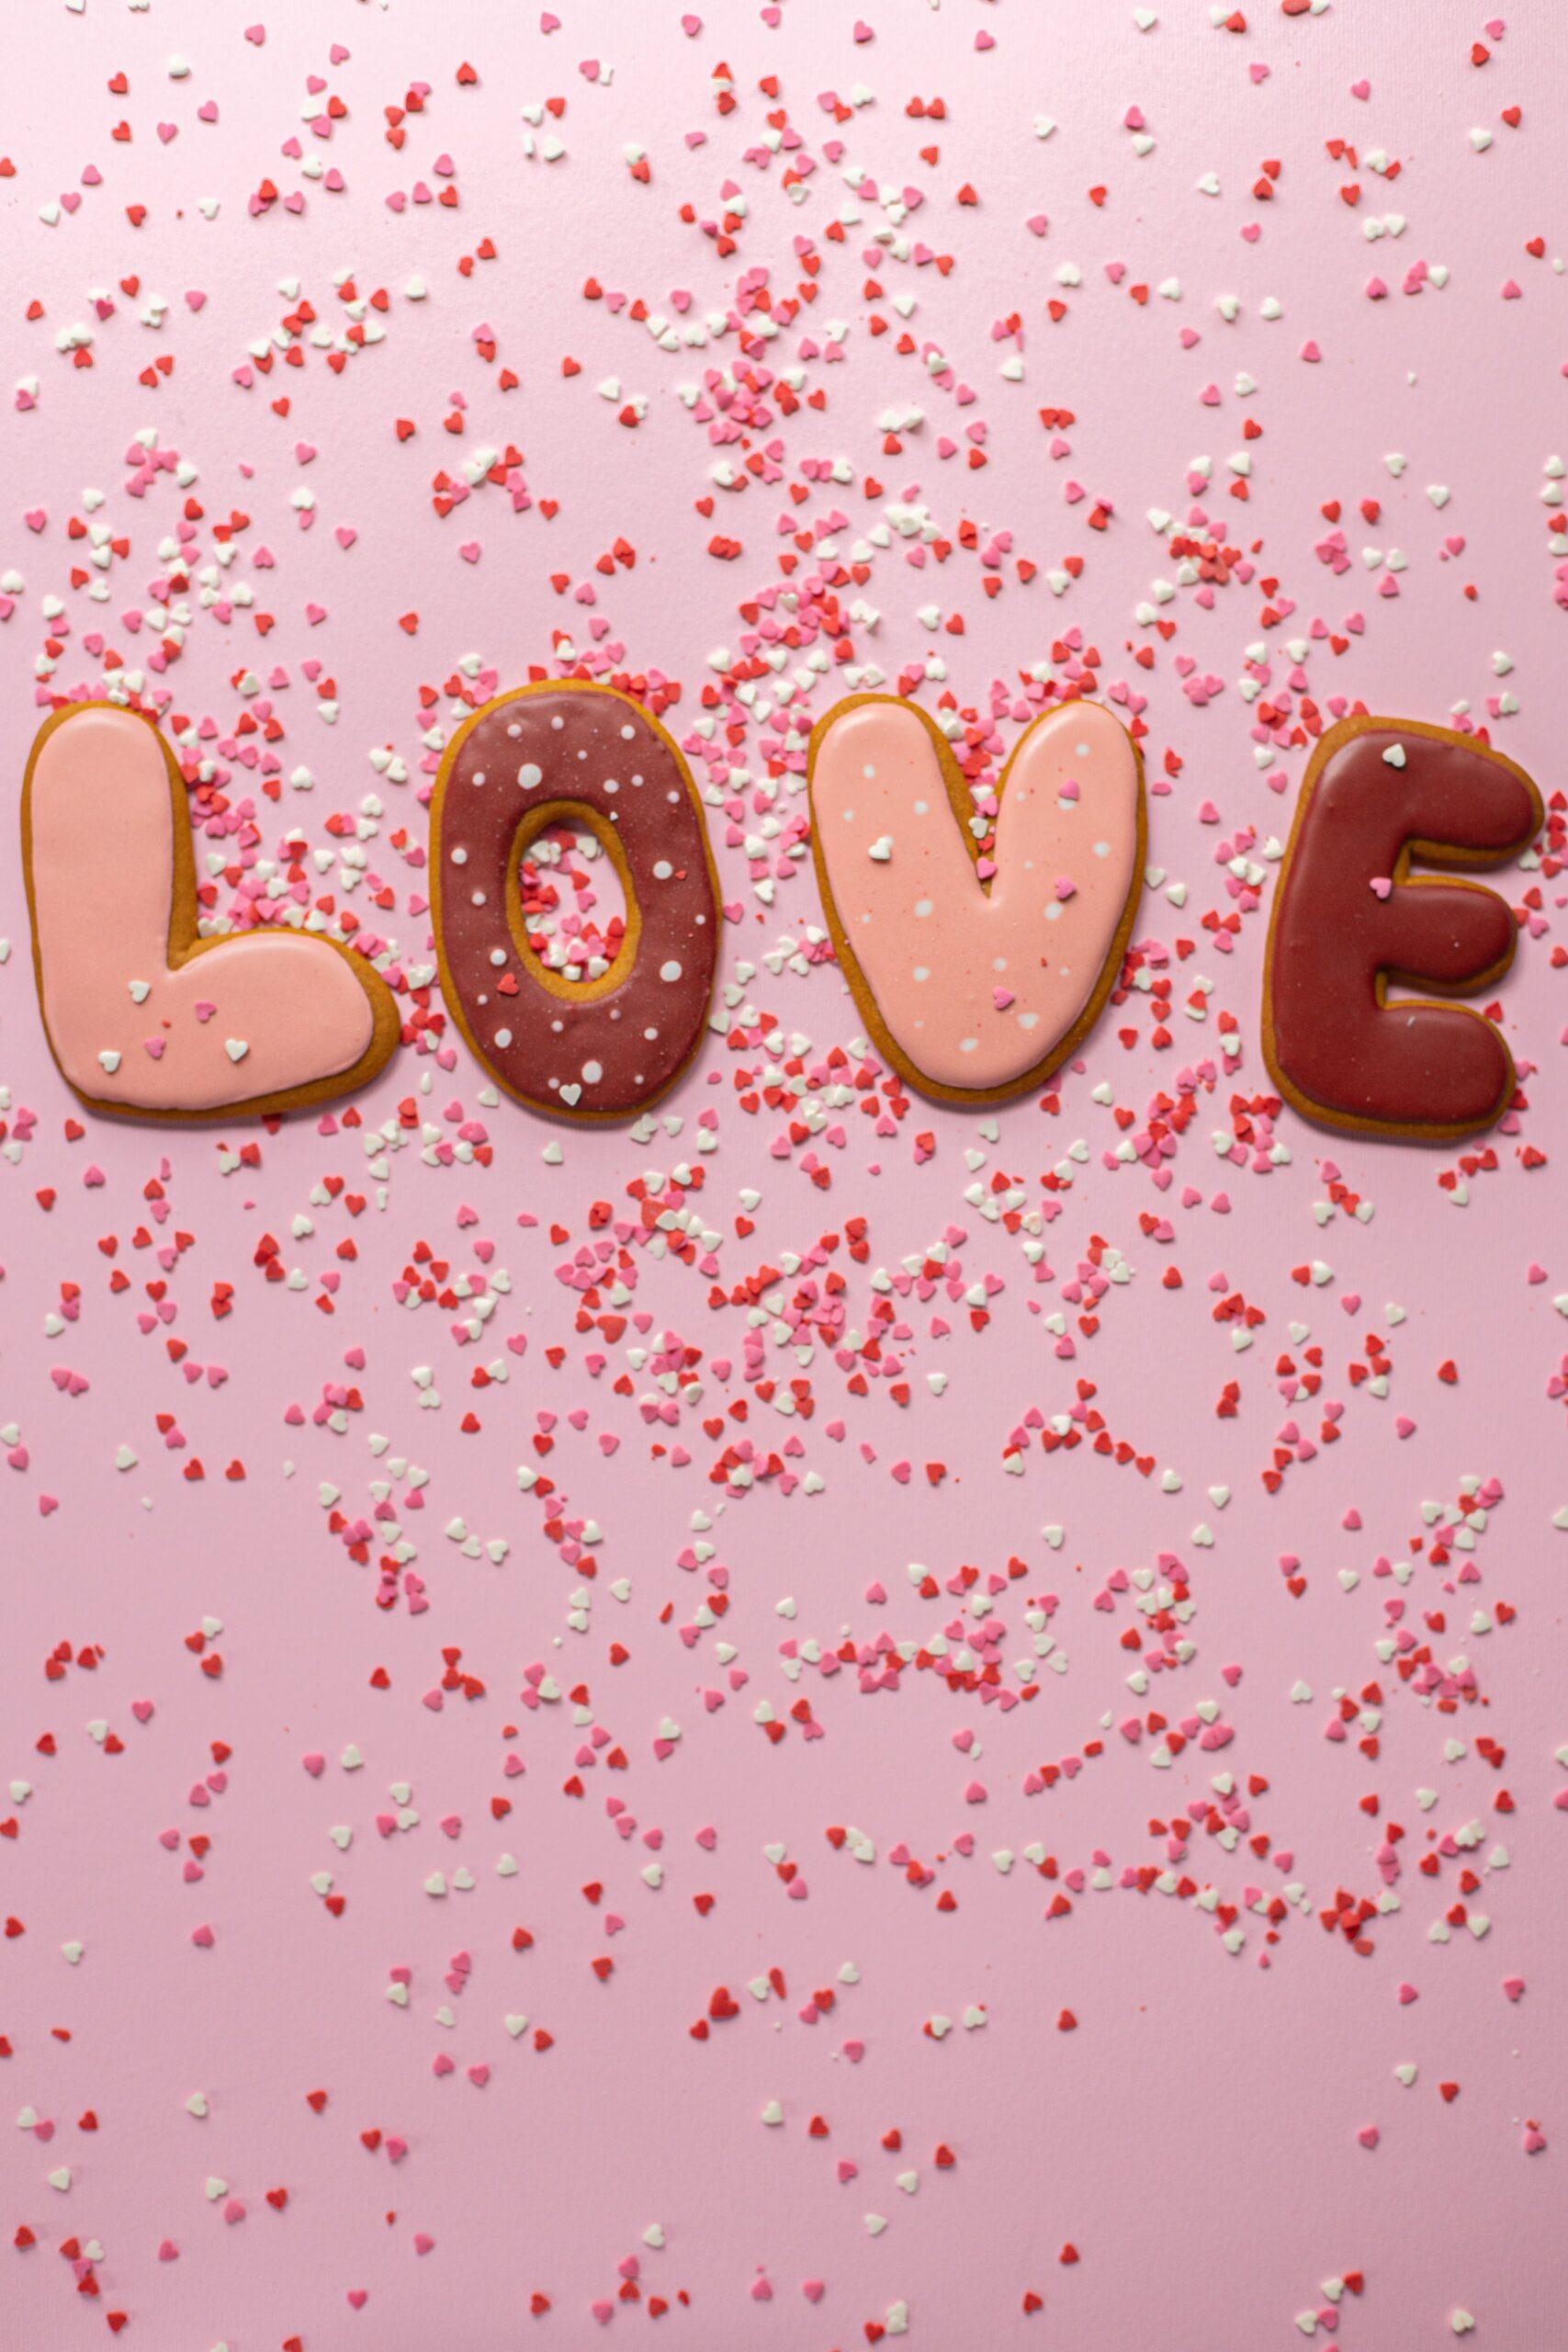 Cookies in letter shape spelling out "Love." They are frosted with pink and maroon frosting and have heart sprinkles.